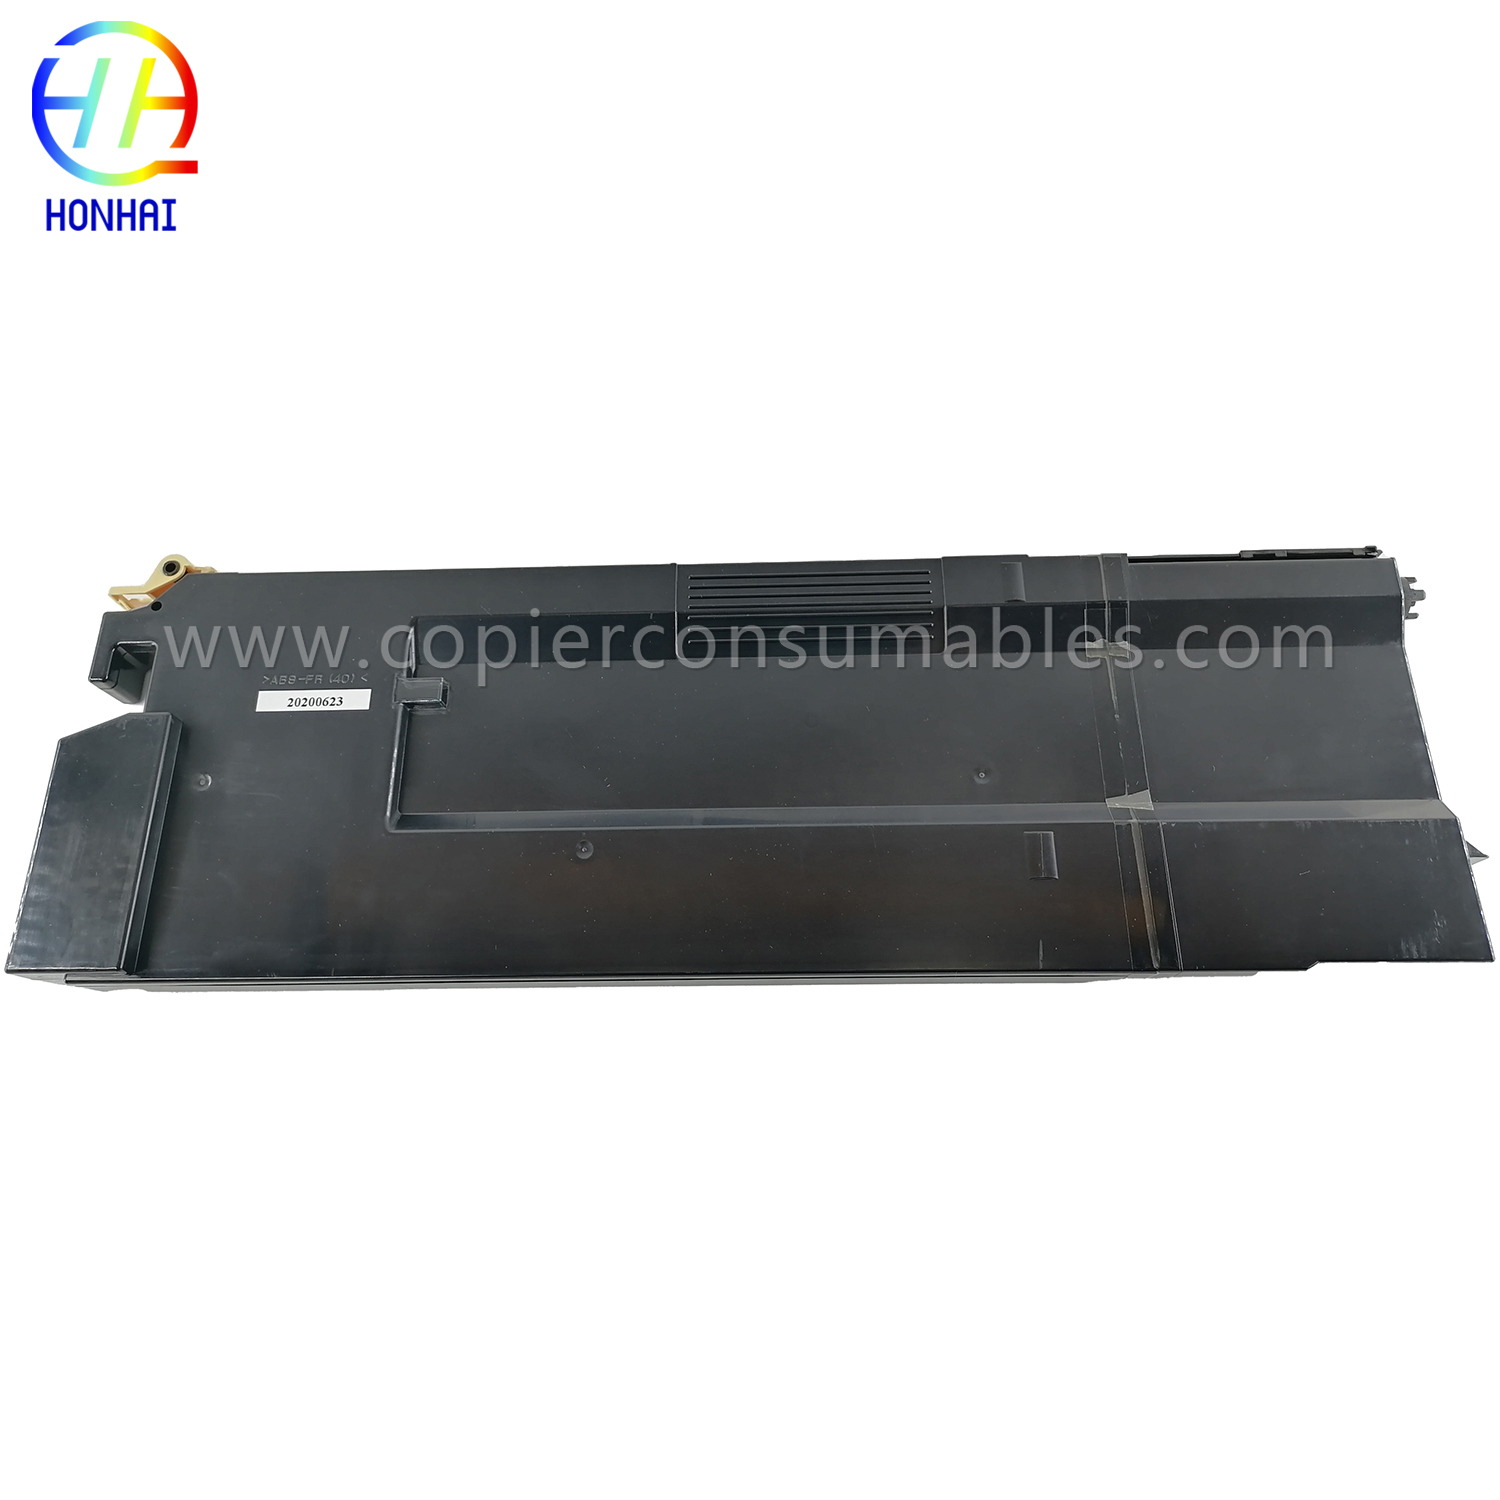 Waste Toner Container for Xerox 4110 4127 4590 4595 D110 D125 D136 D95 ED125 ED95A 008R13036(3) 拷贝